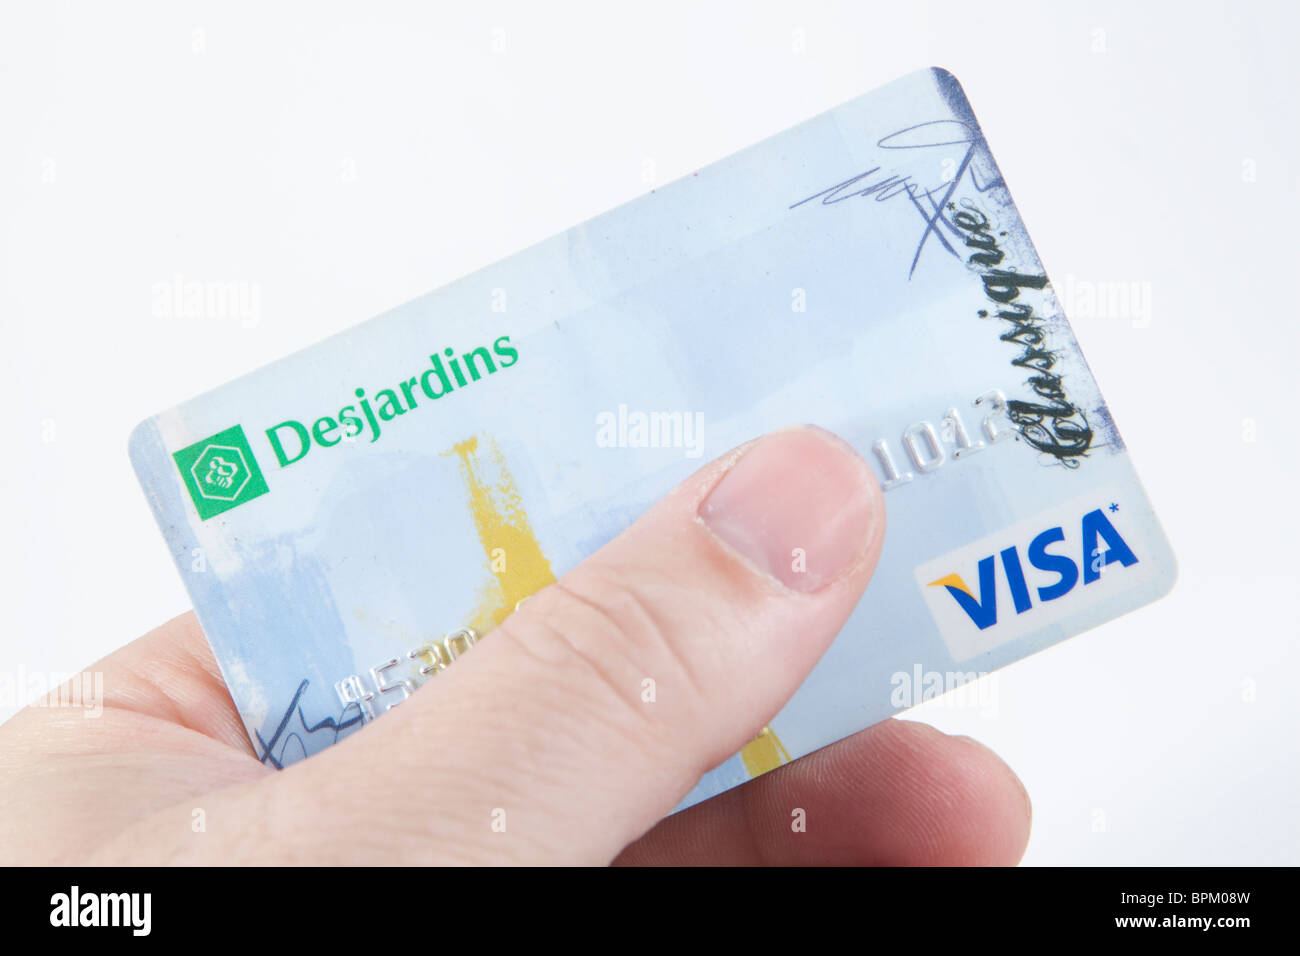 A Desjardins Visa credit Card over a white background Stock Photo - Alamy